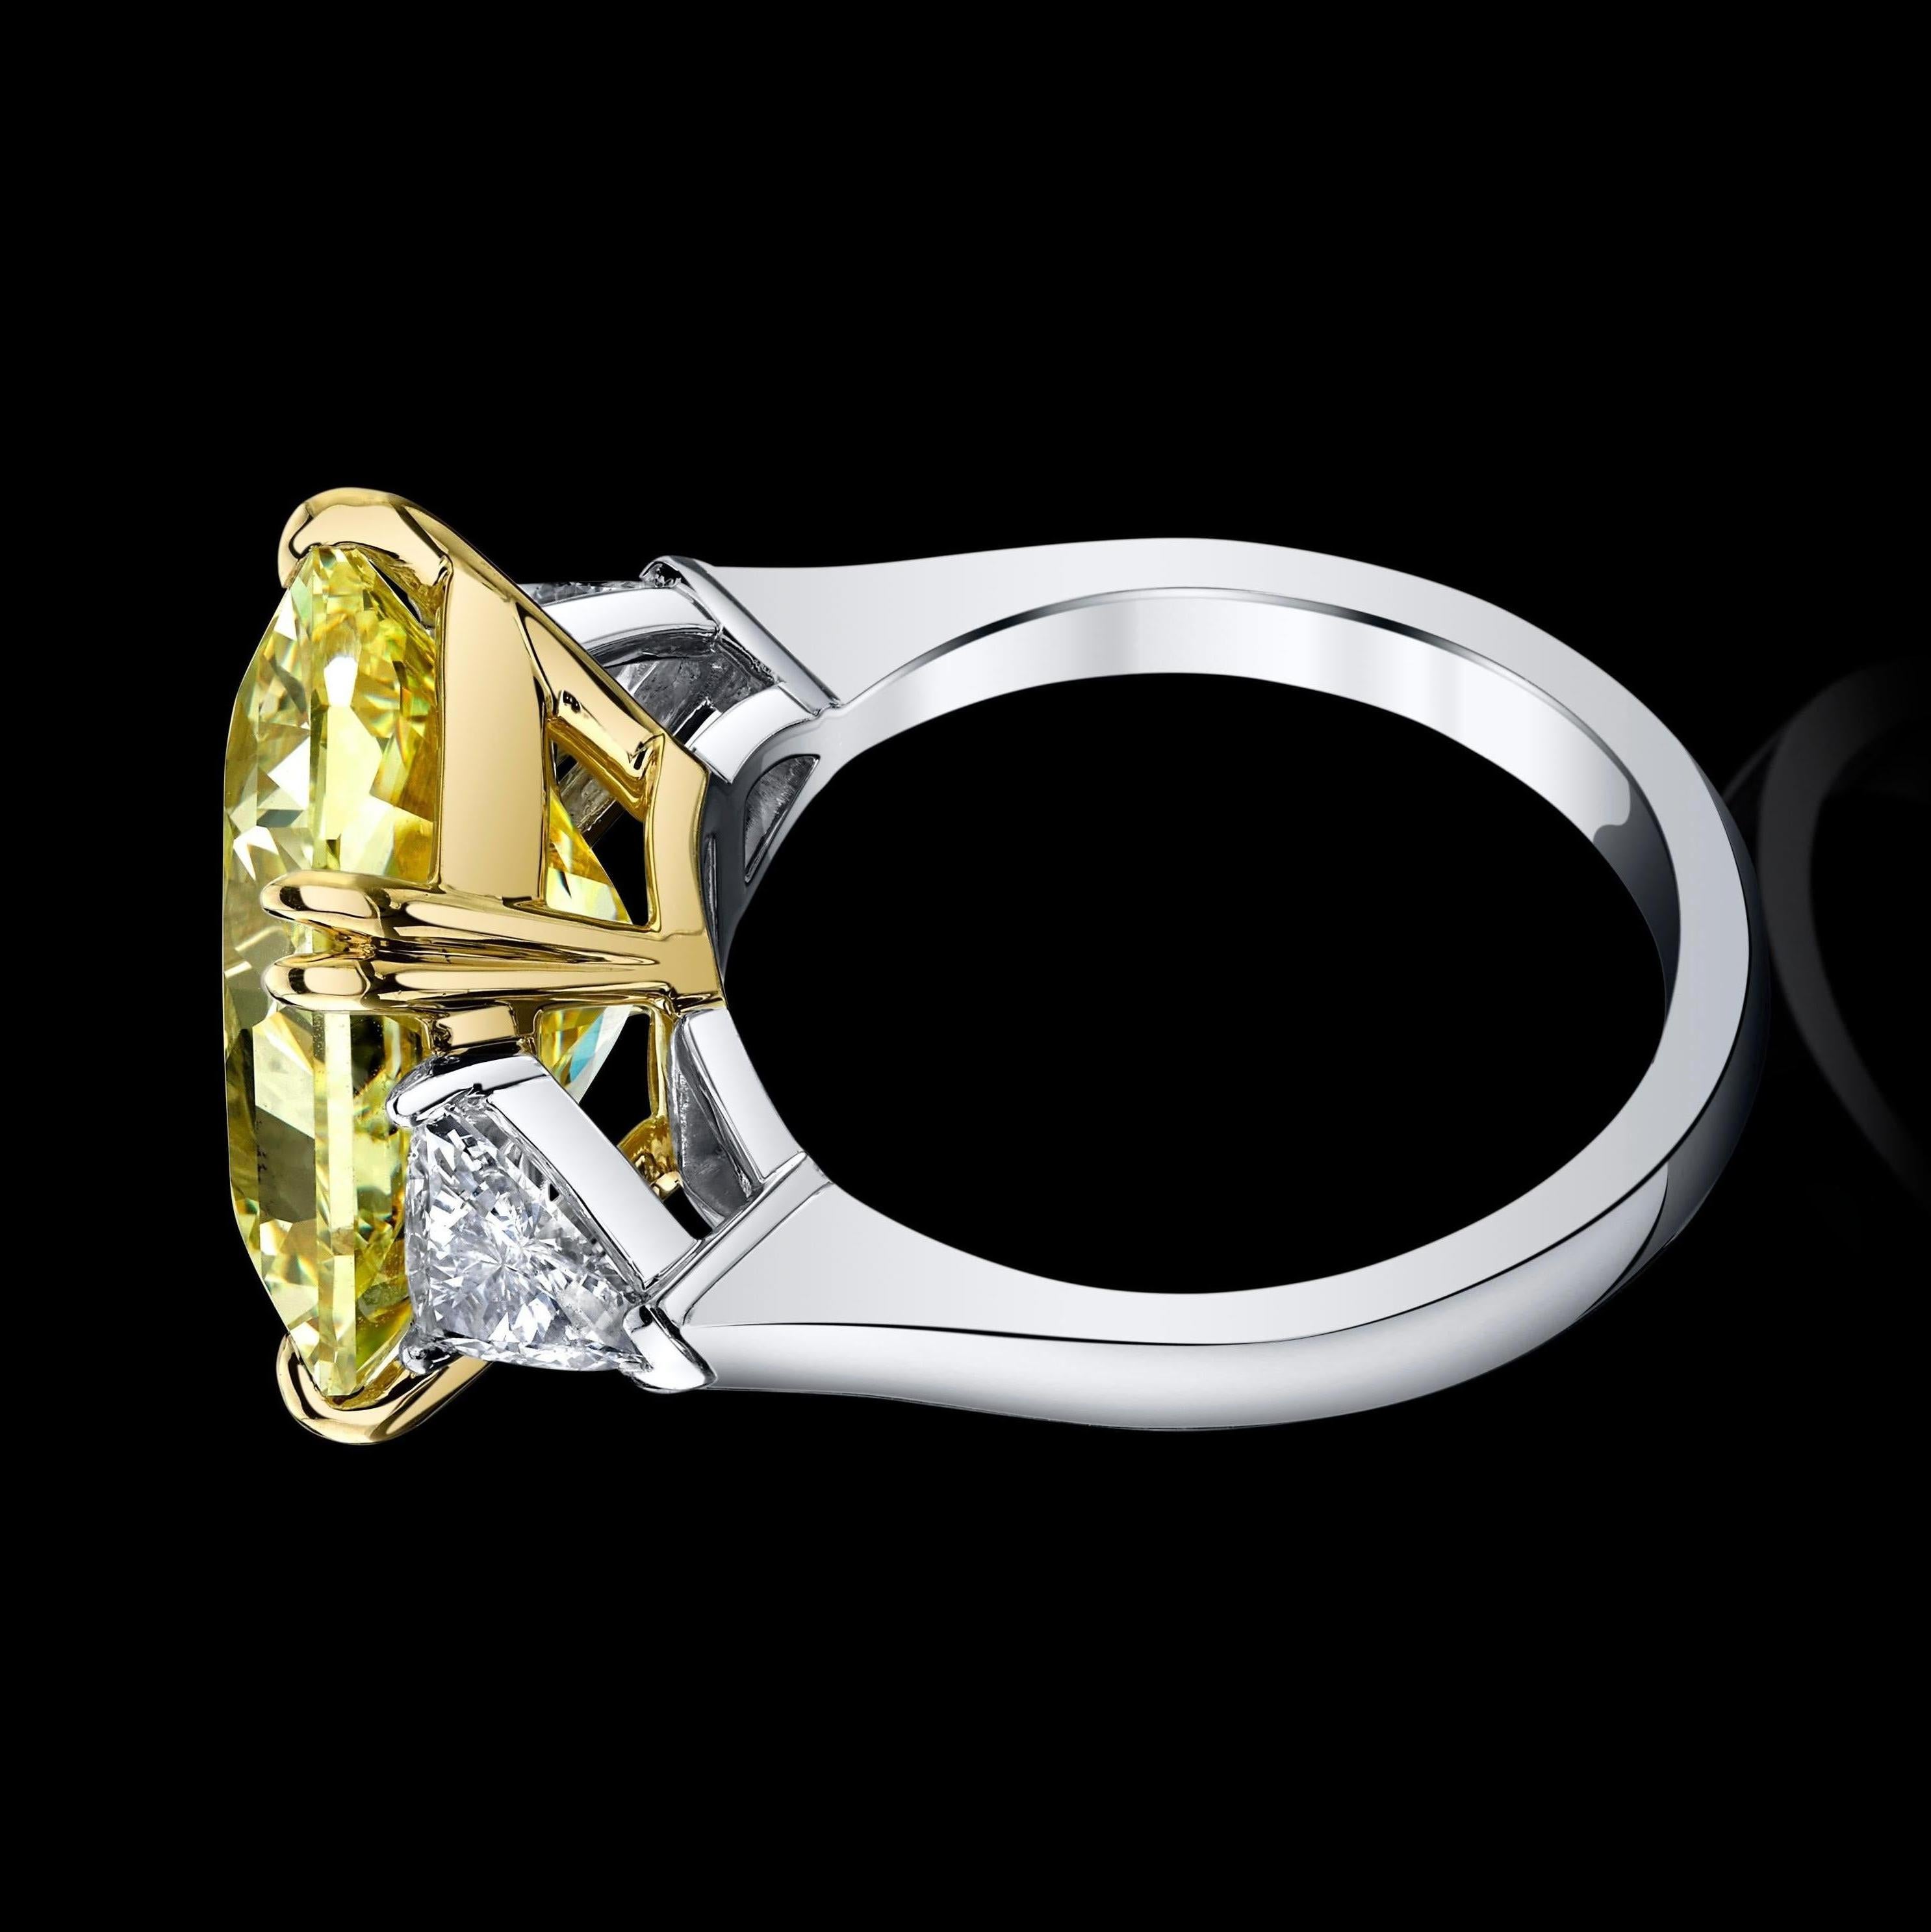 Contemporary GIA Certified Important 10.12 Carat Fancy Intense Yellow Radiant Diamond Ring For Sale